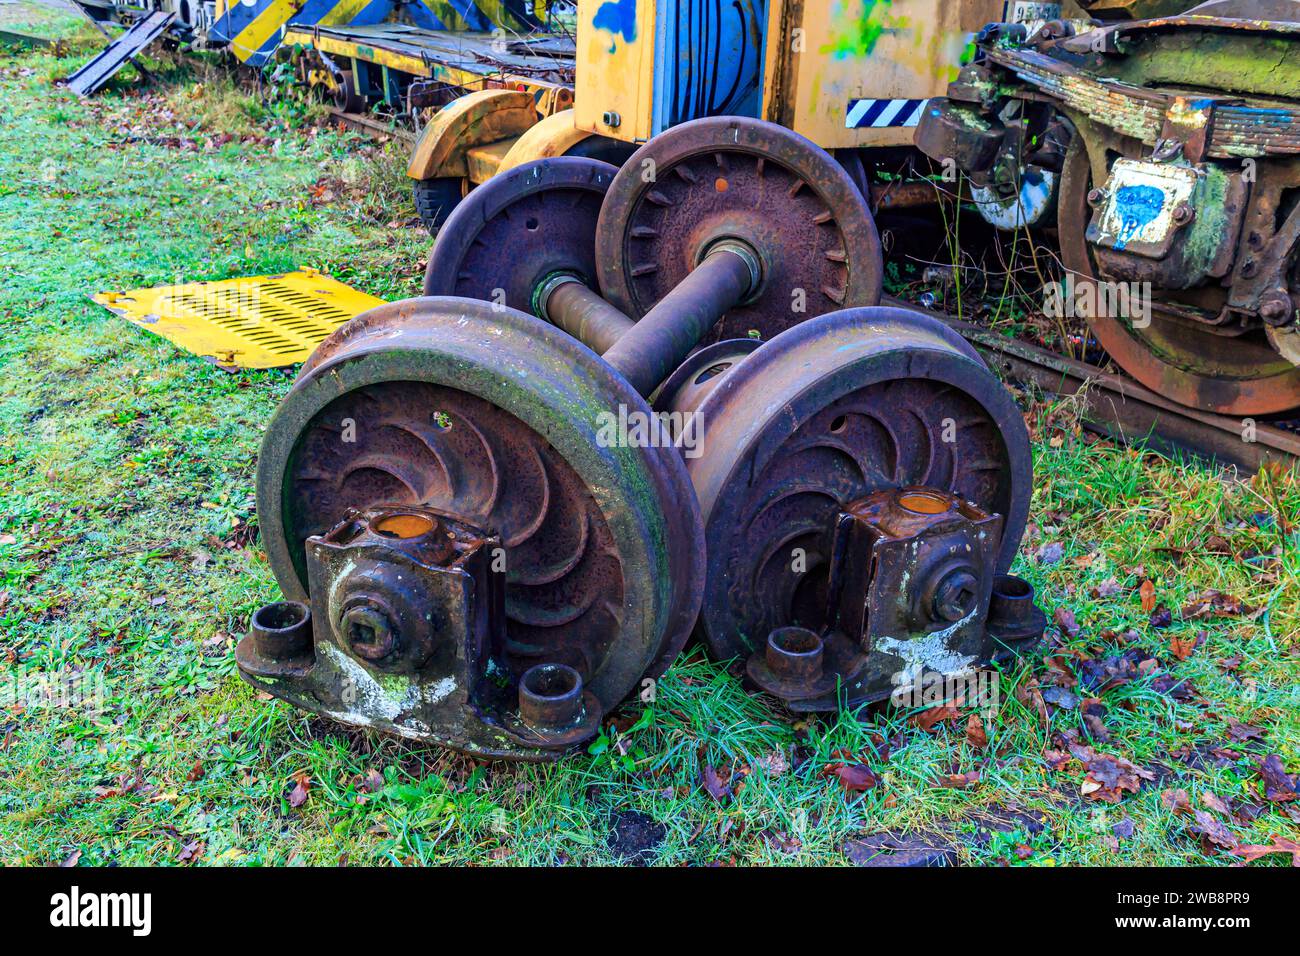 Two sets of train wheels stacked on green grass, parts of old freight railway, disused tracks in old station, remains of dilapidated carriages in back Stock Photo